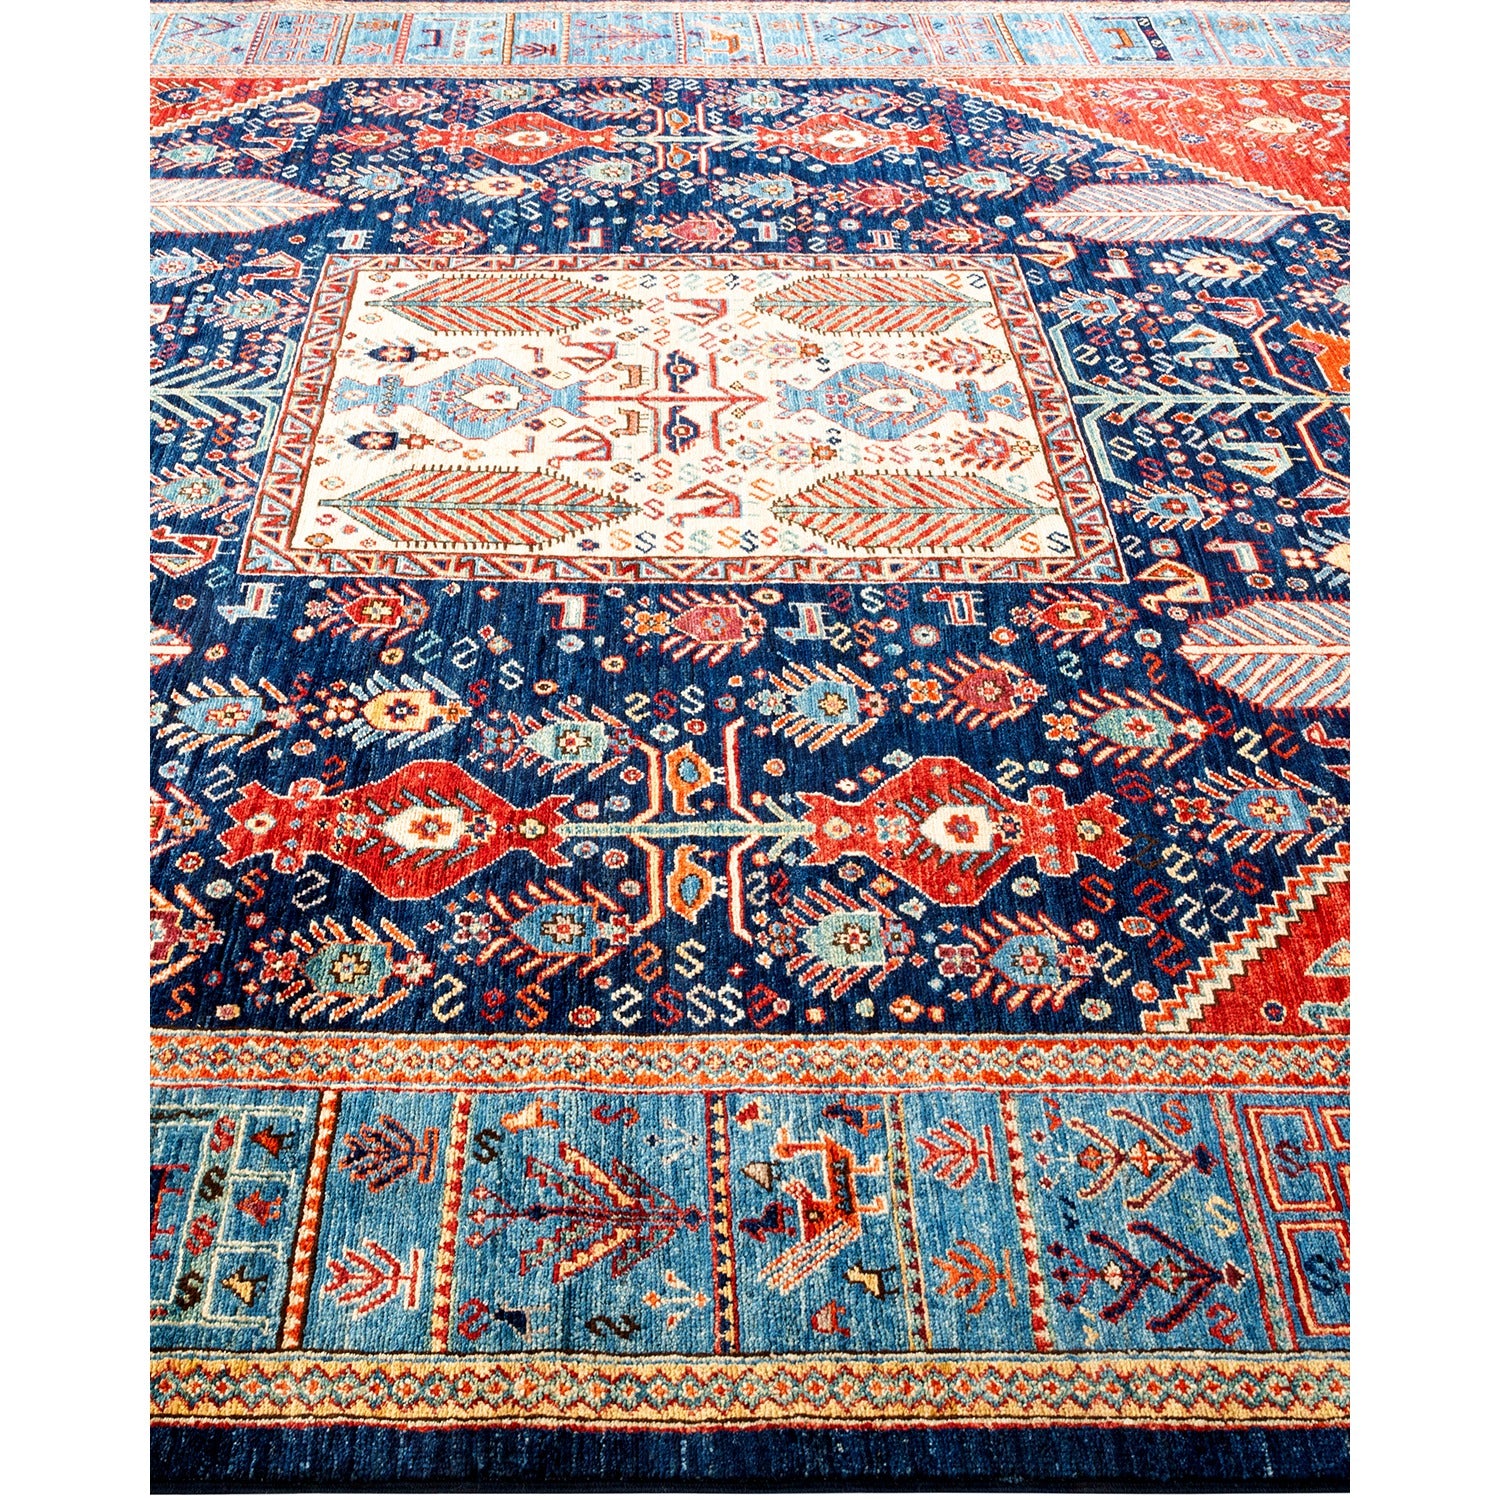 Exquisite traditional oriental rug showcases intricate patterns and vibrant colors.